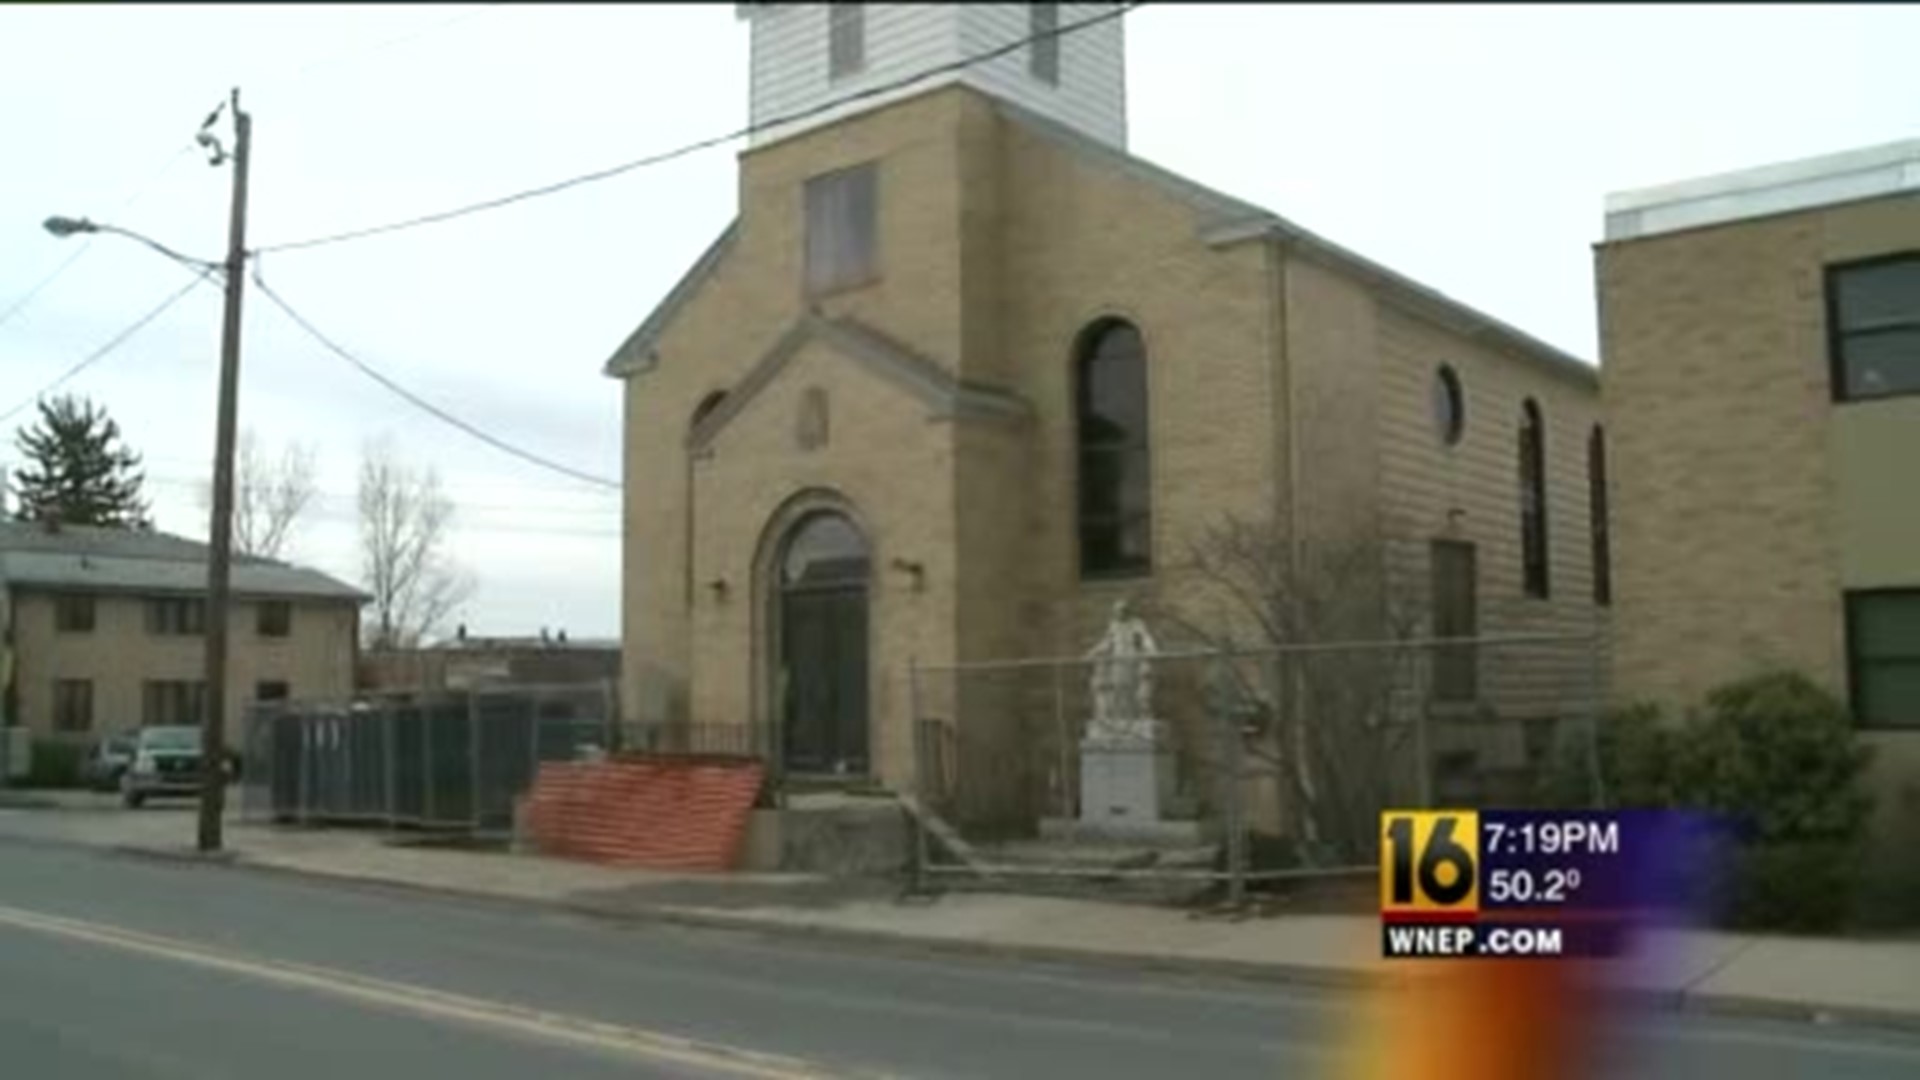 New Life Planned for Closed Church